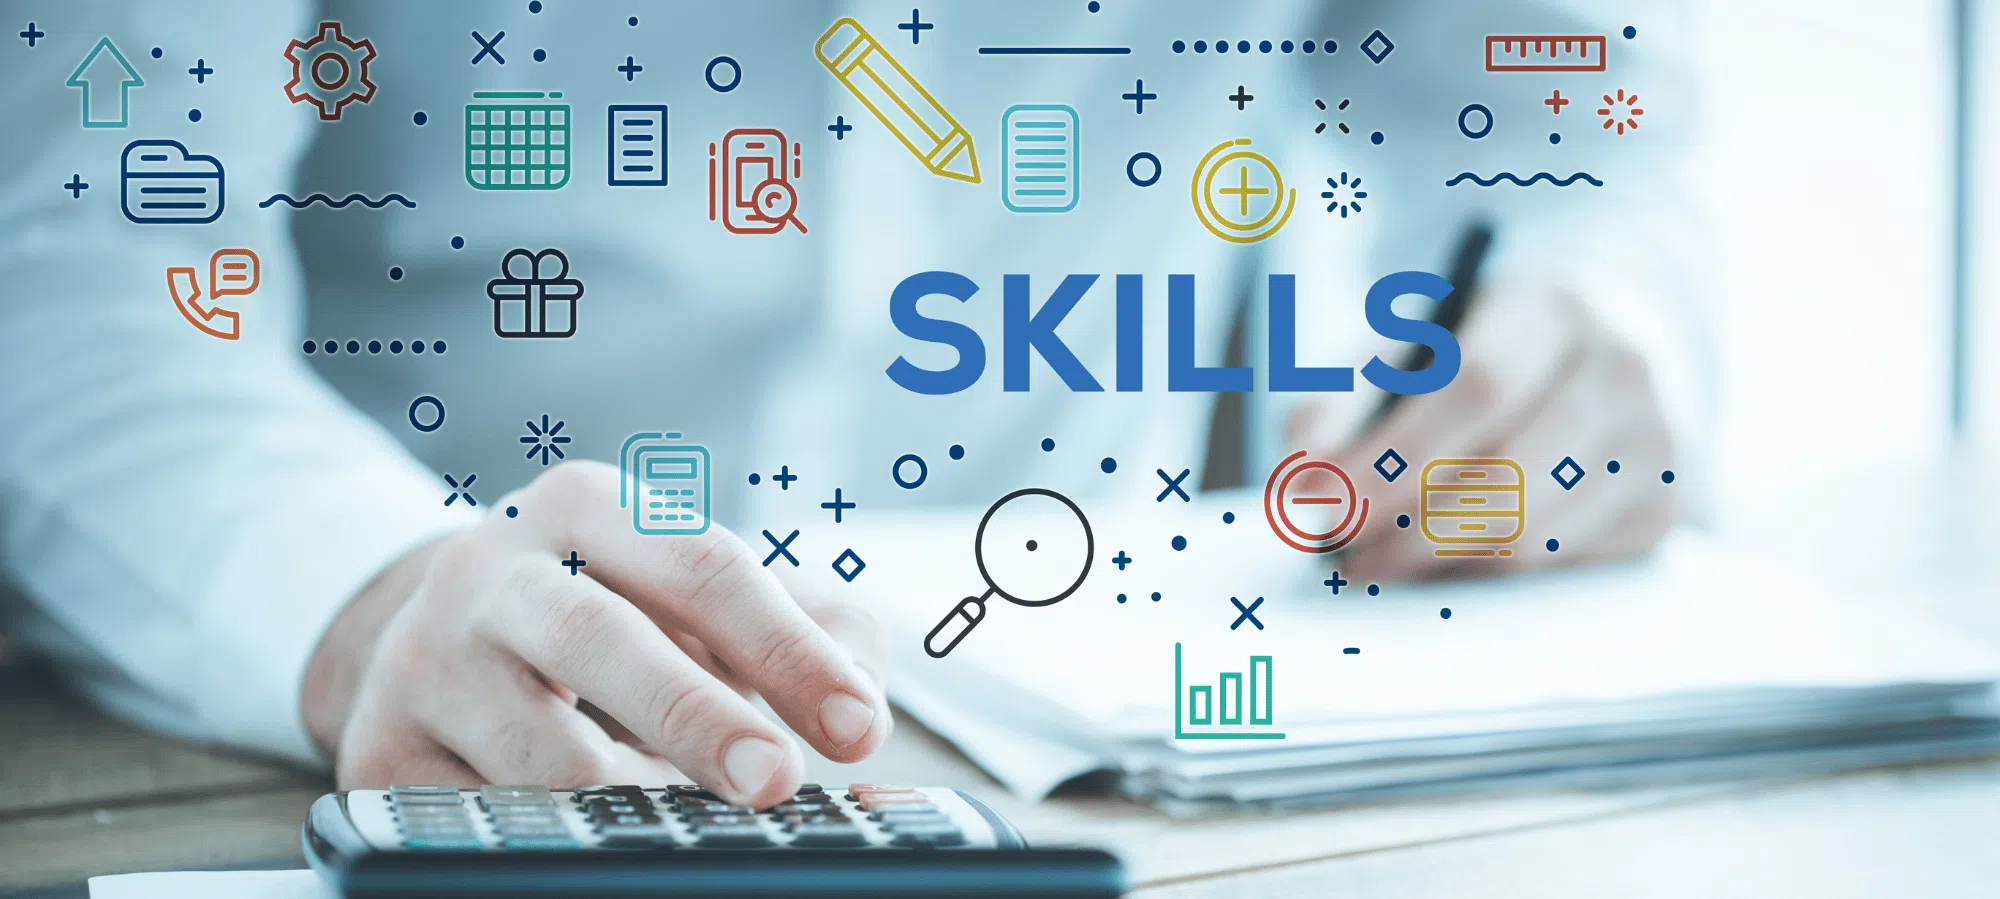 9 Skills That Today’s Employers Are Seeking in Candidates Banner